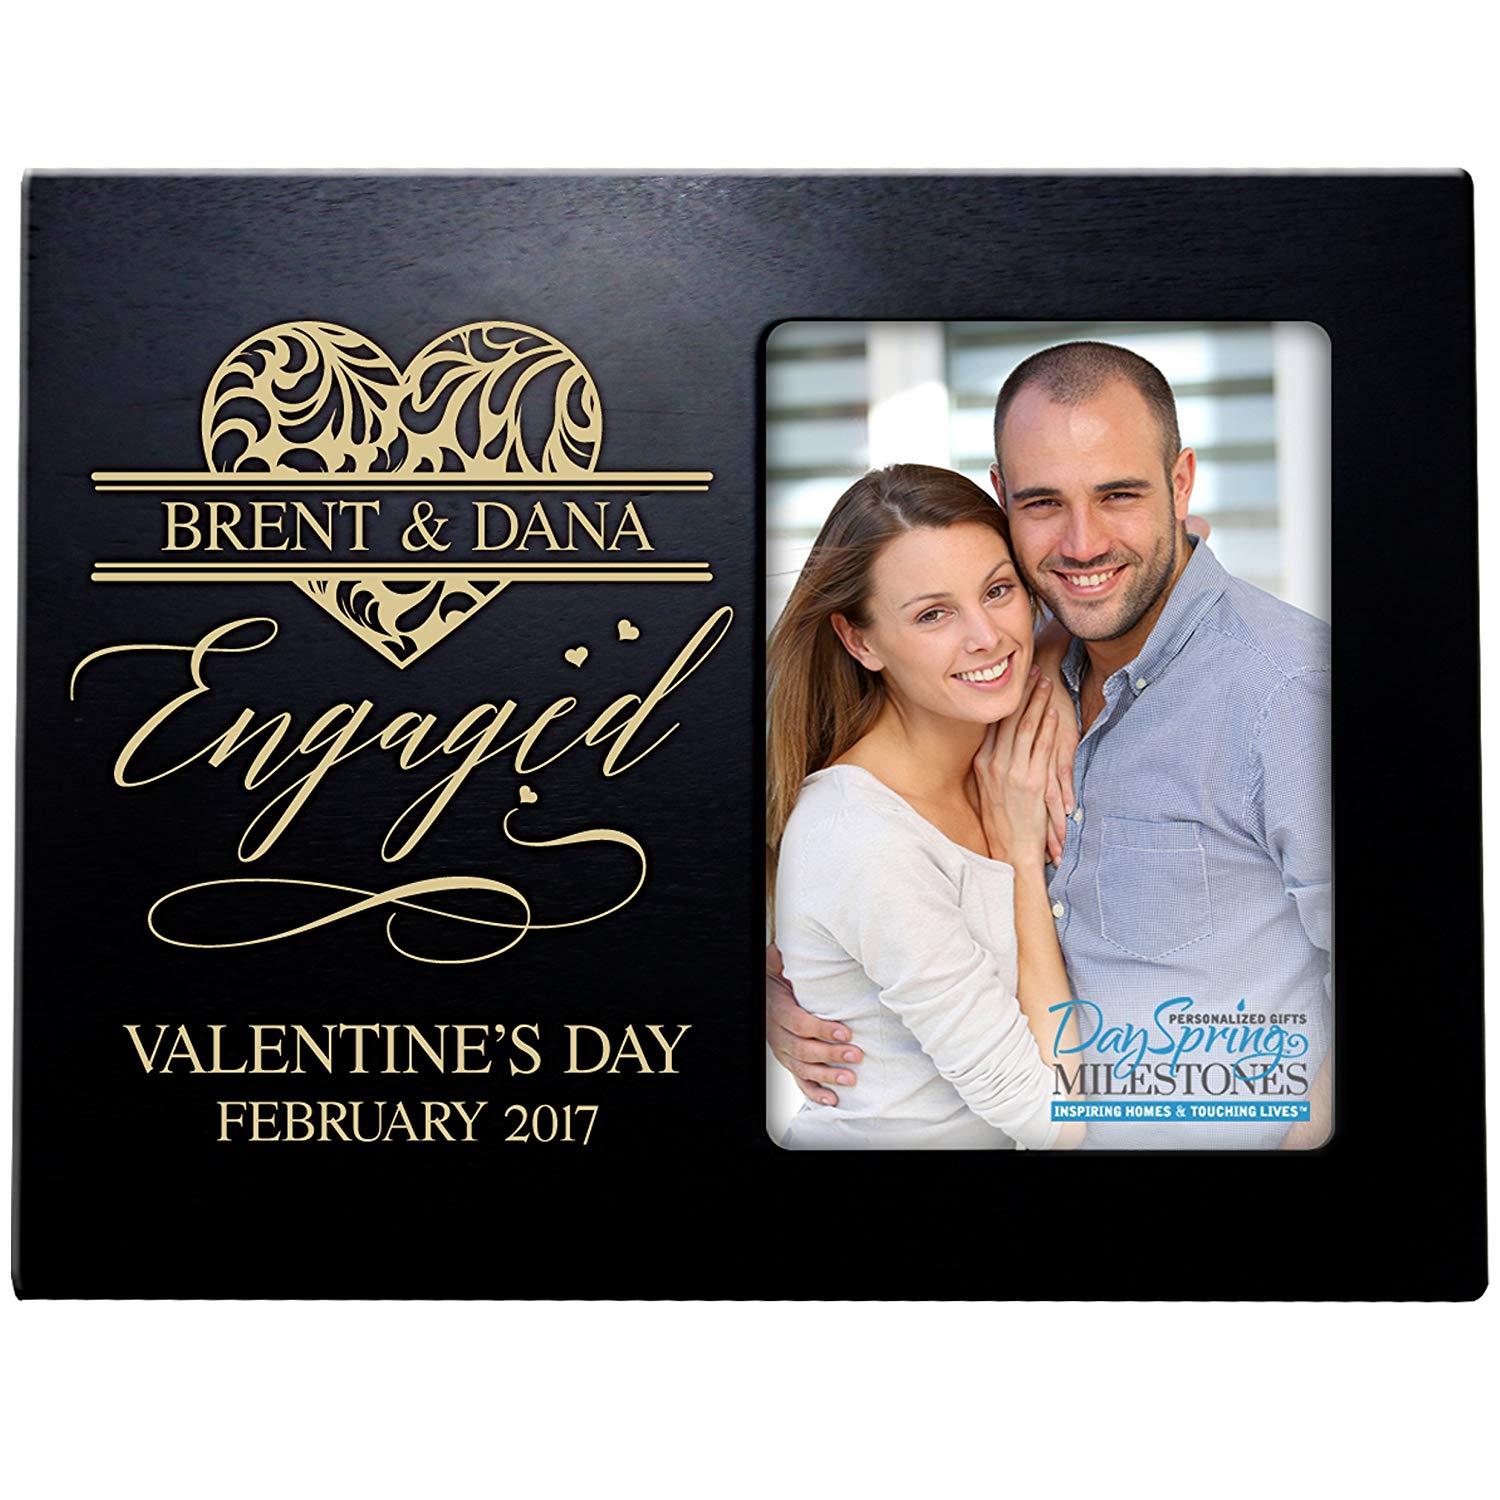 Personalized Valentine's Day Frames - Engaged - LifeSong Milestones